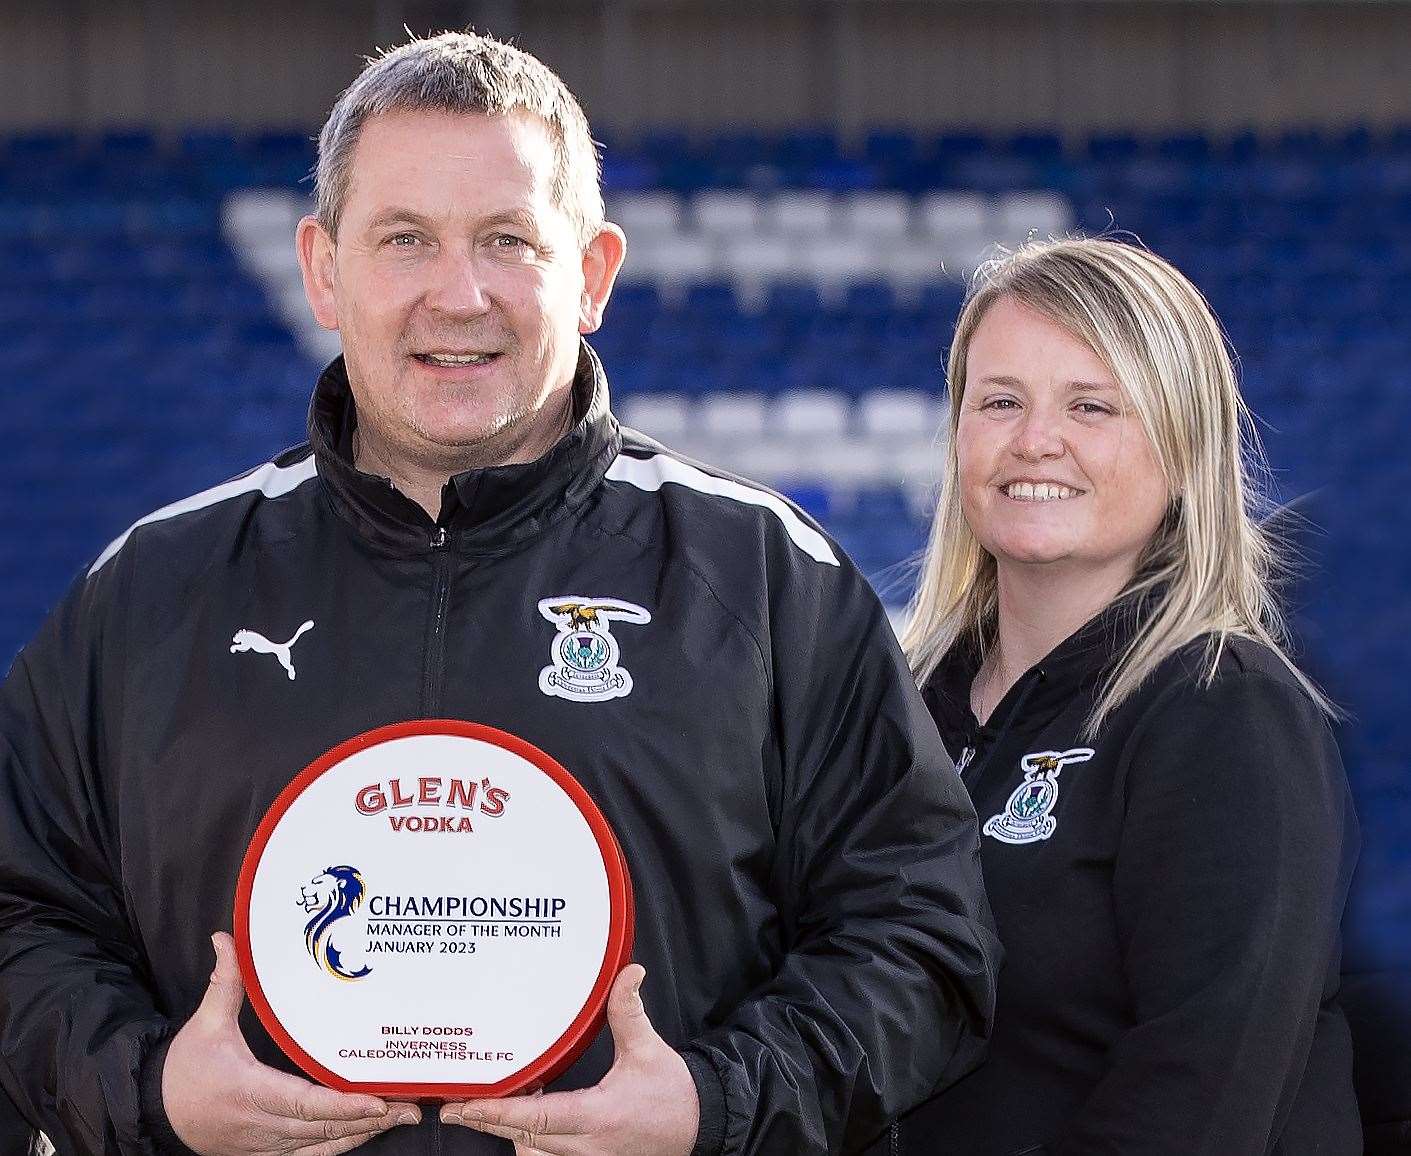 Inverness Caledonian Thistle head coach Billy Dodds praised the work of secretary Fiona McWilliams who spotted the error by Queen’s Park in the Scottish Cup match.